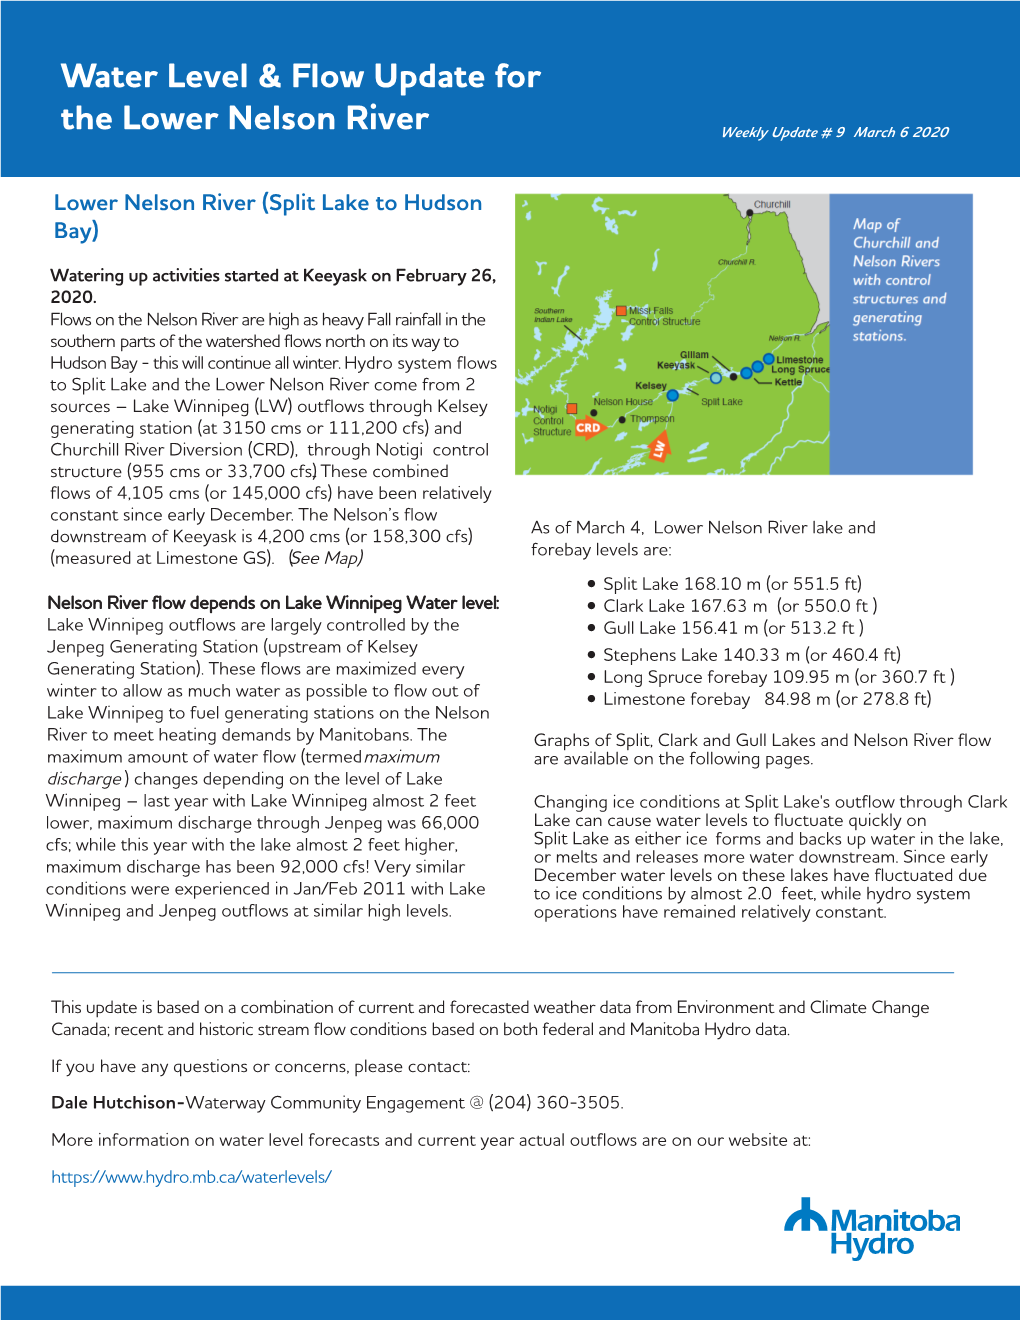 Water Level & Flow Update for the Lower Nelson River